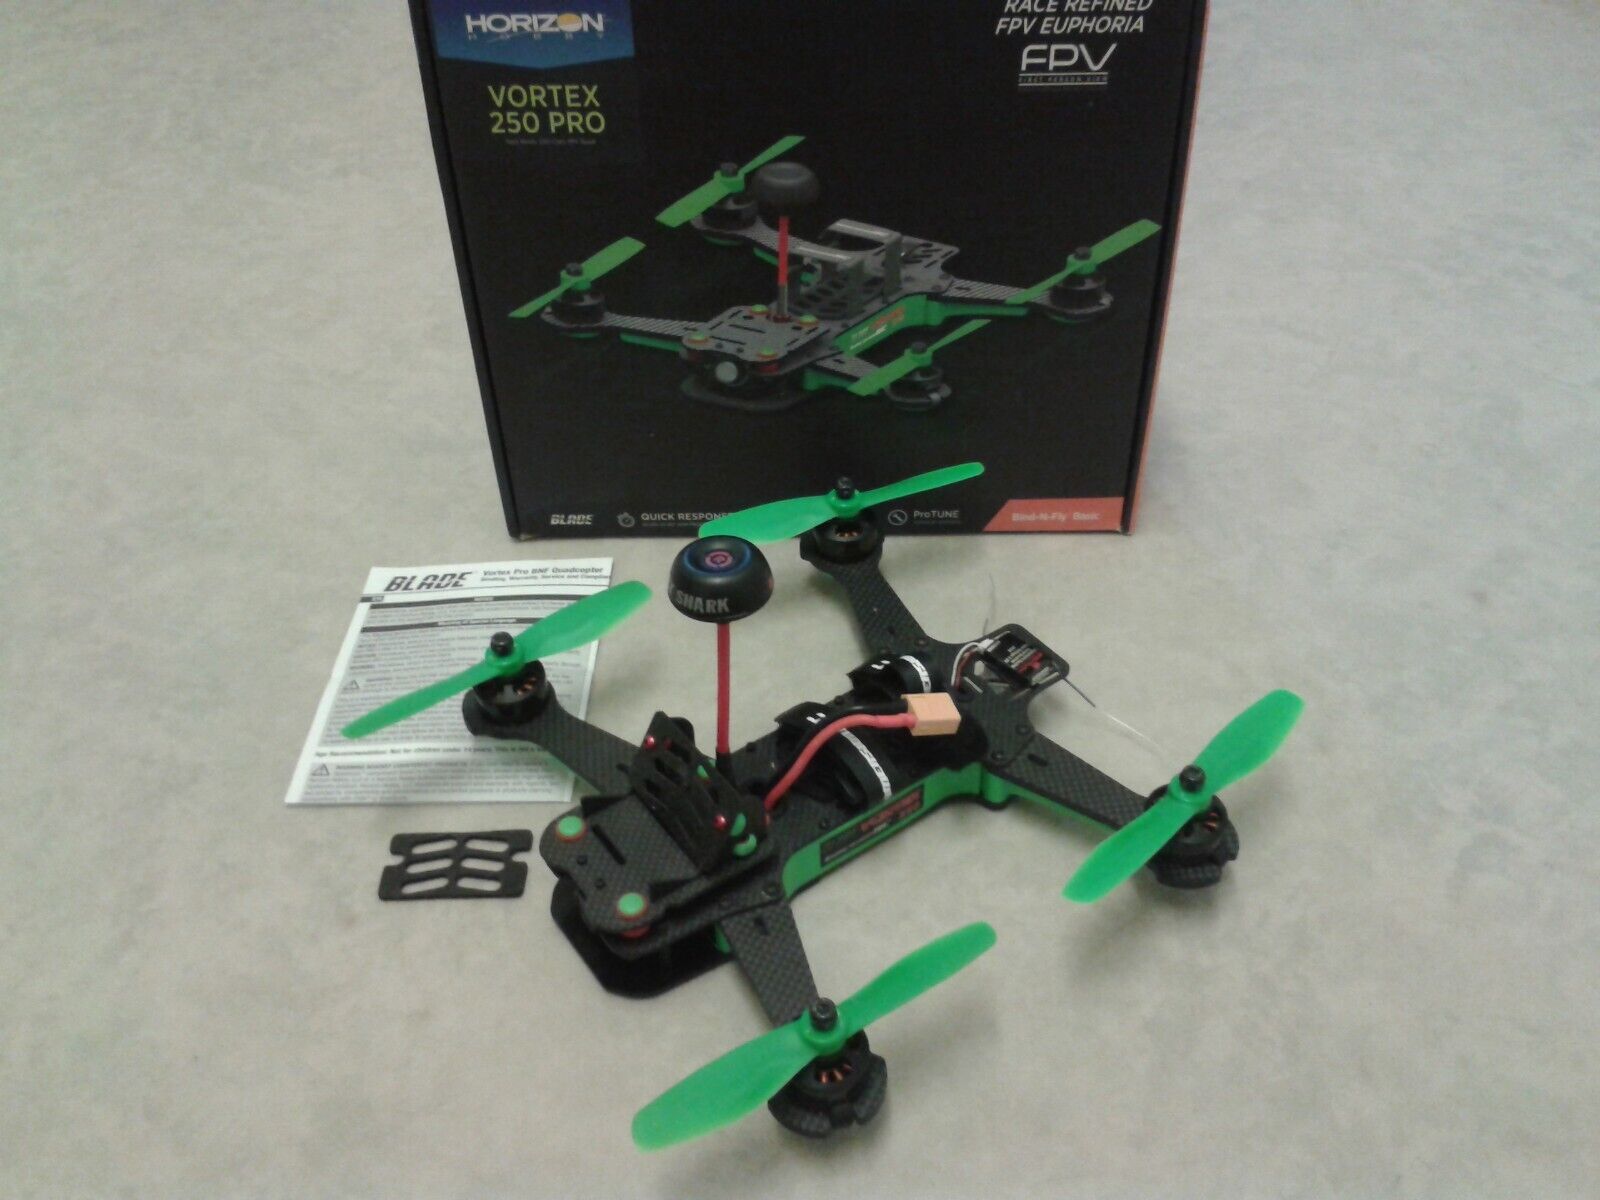 Vortex 250 PRO Racing Drone with FPV